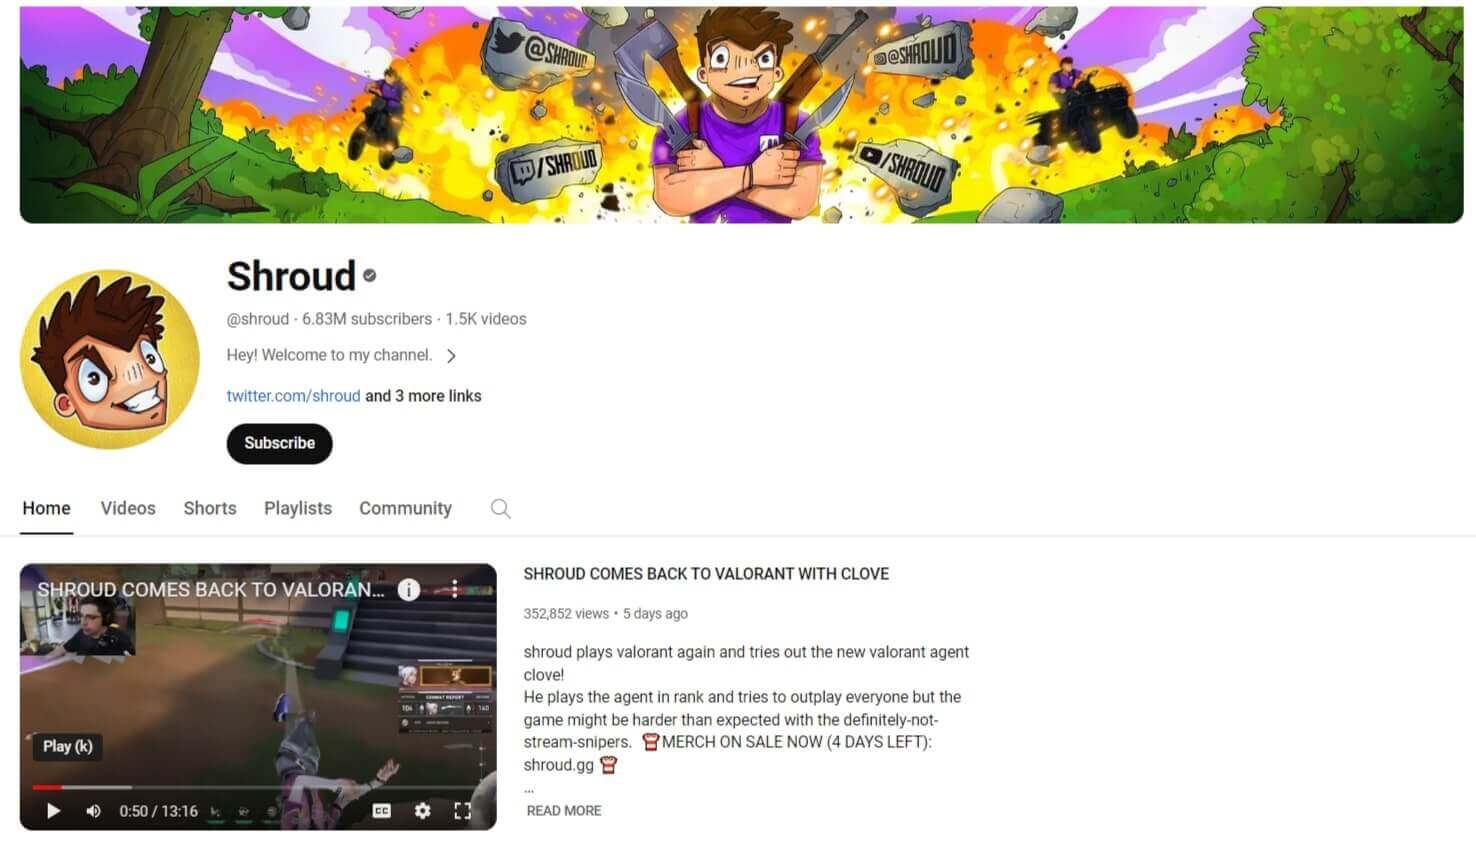 A screenshot showing the YouTube channel of esport player Shroud.